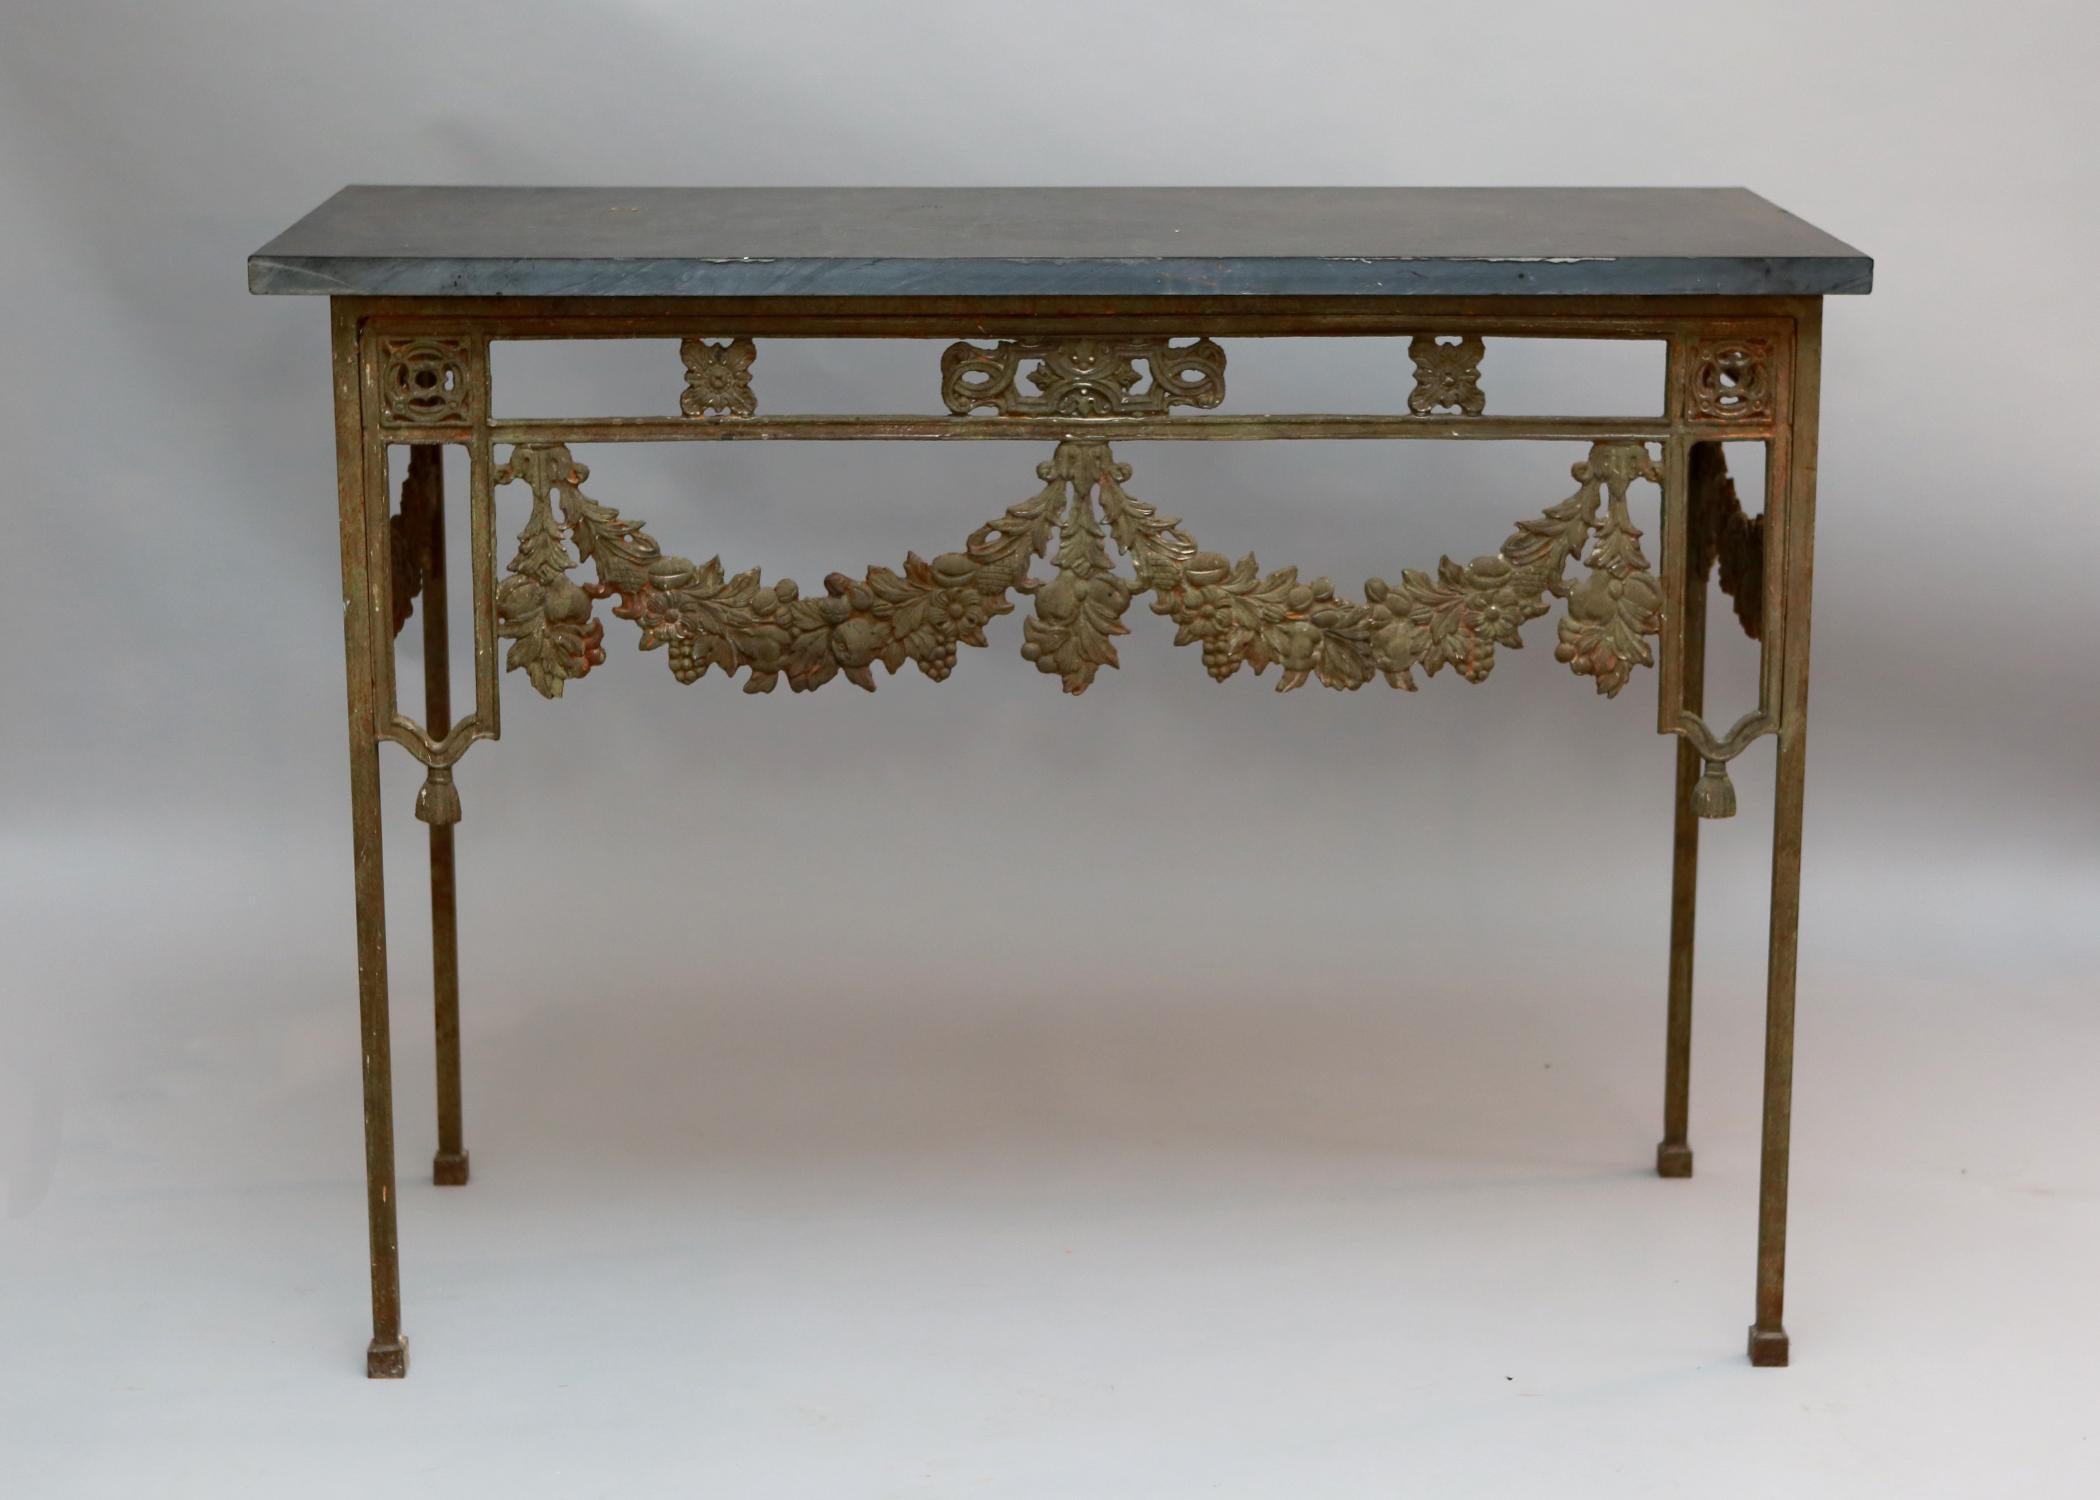 19th century French wrought iron console tables decorated with garlands and swags of floral decoration and original slate tops.